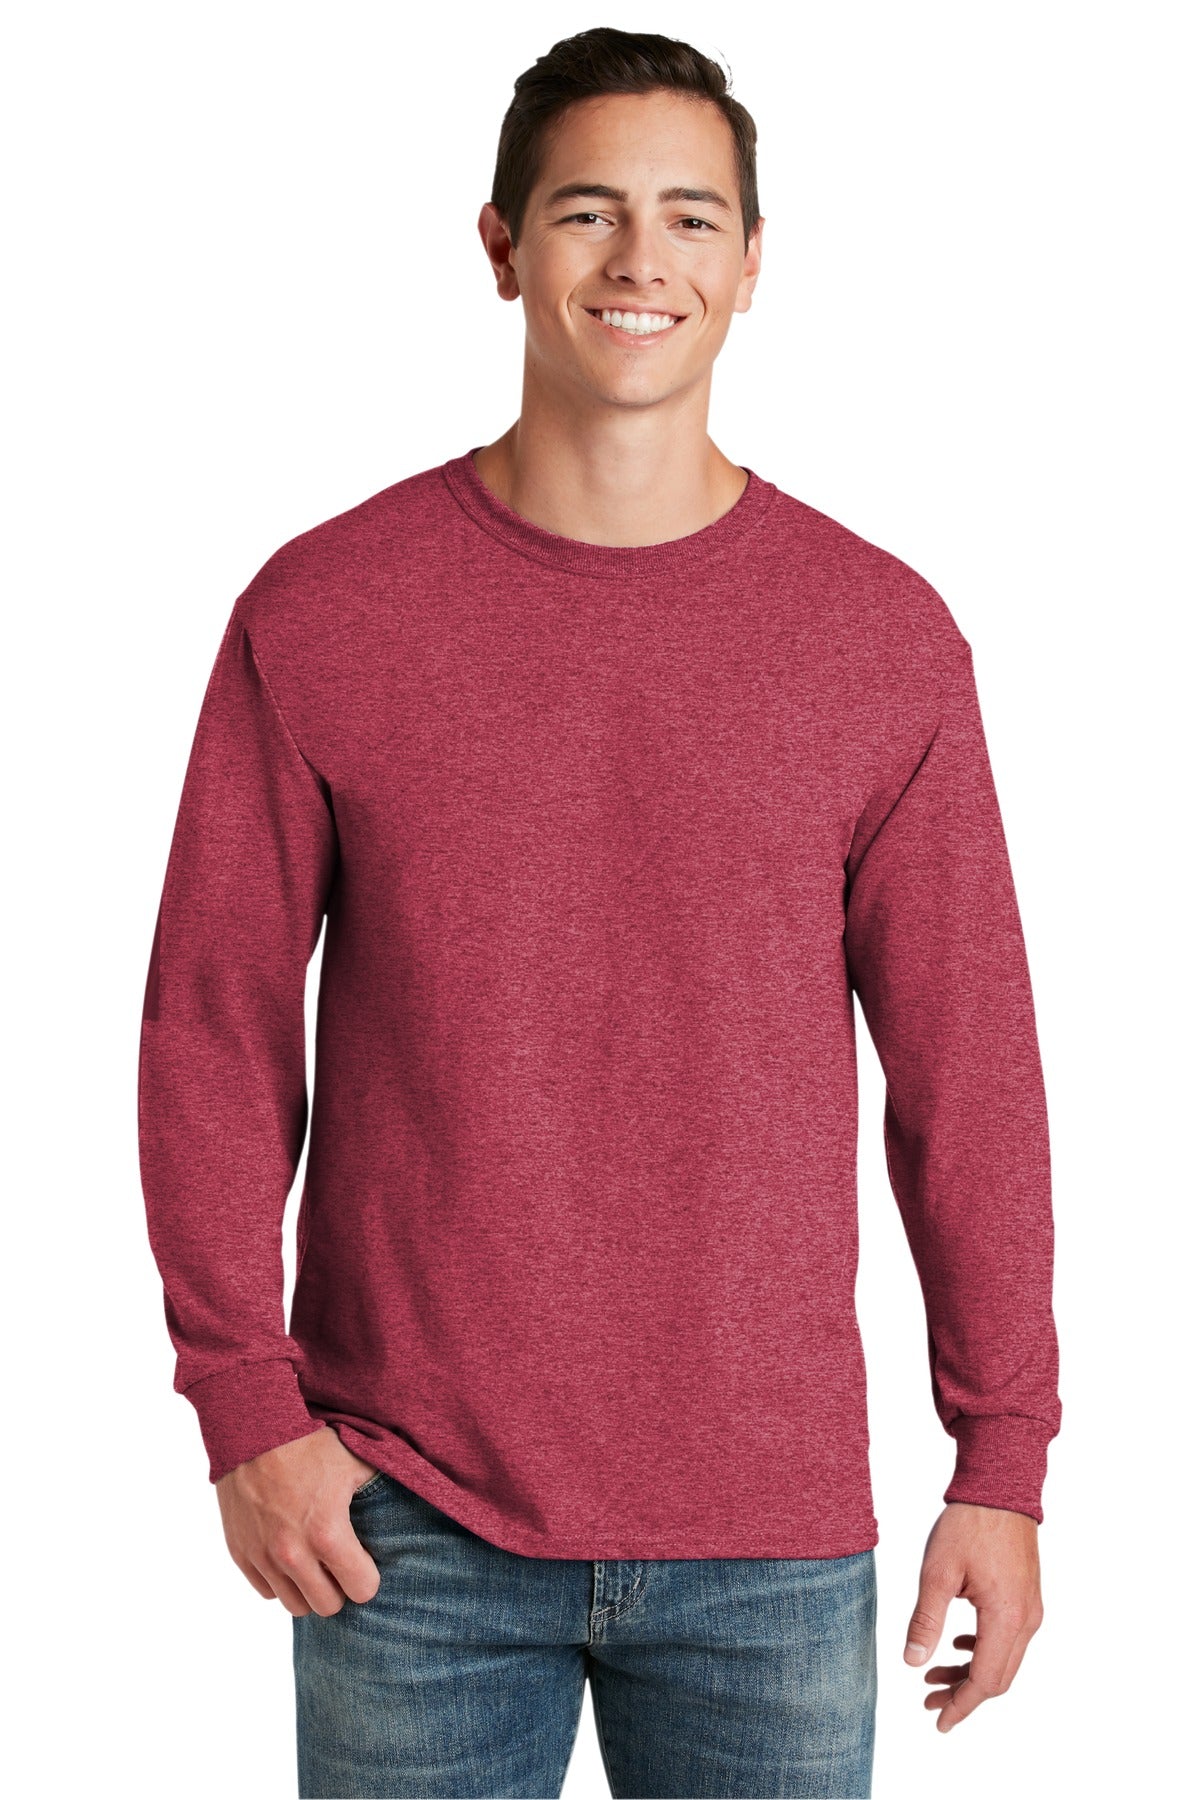 JERZEES® - Dri-Power® 50/50 Cotton/Poly Long Sleeve T-Shirt. 29LS [Vintage Heather Red] - DFW Impression